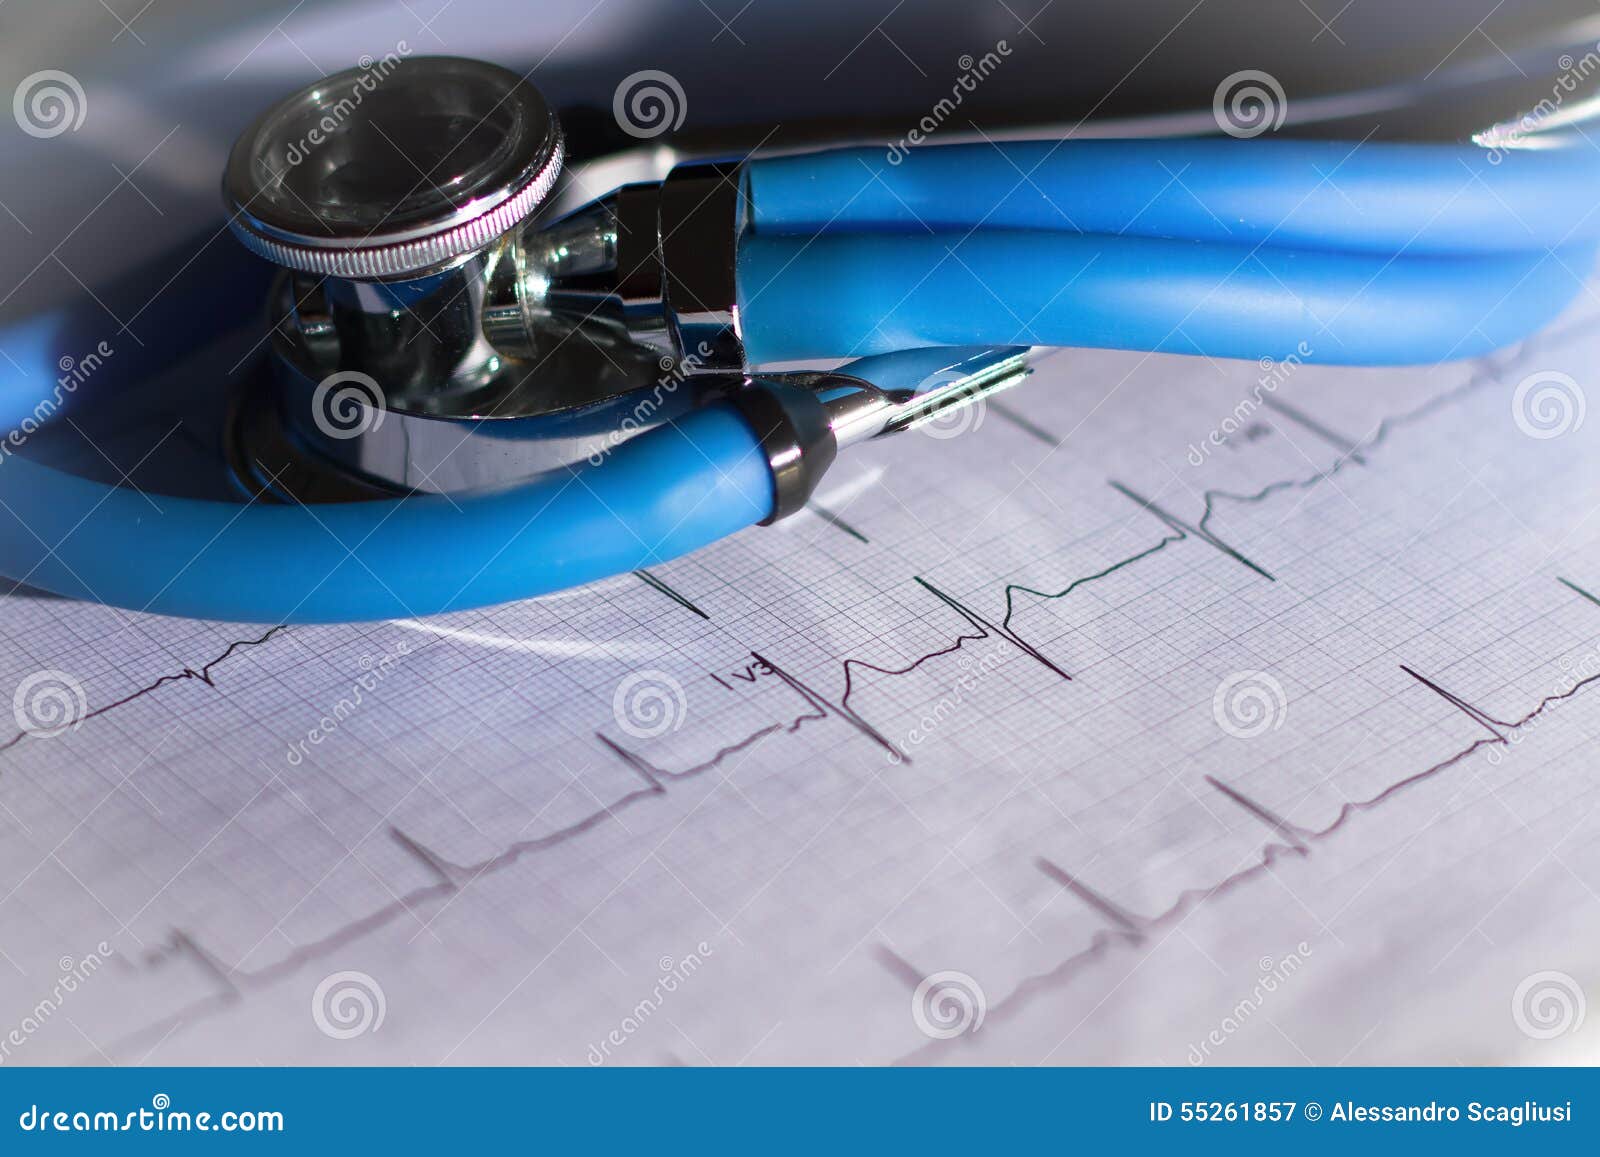 ekg and stethoscope with bright vignetting